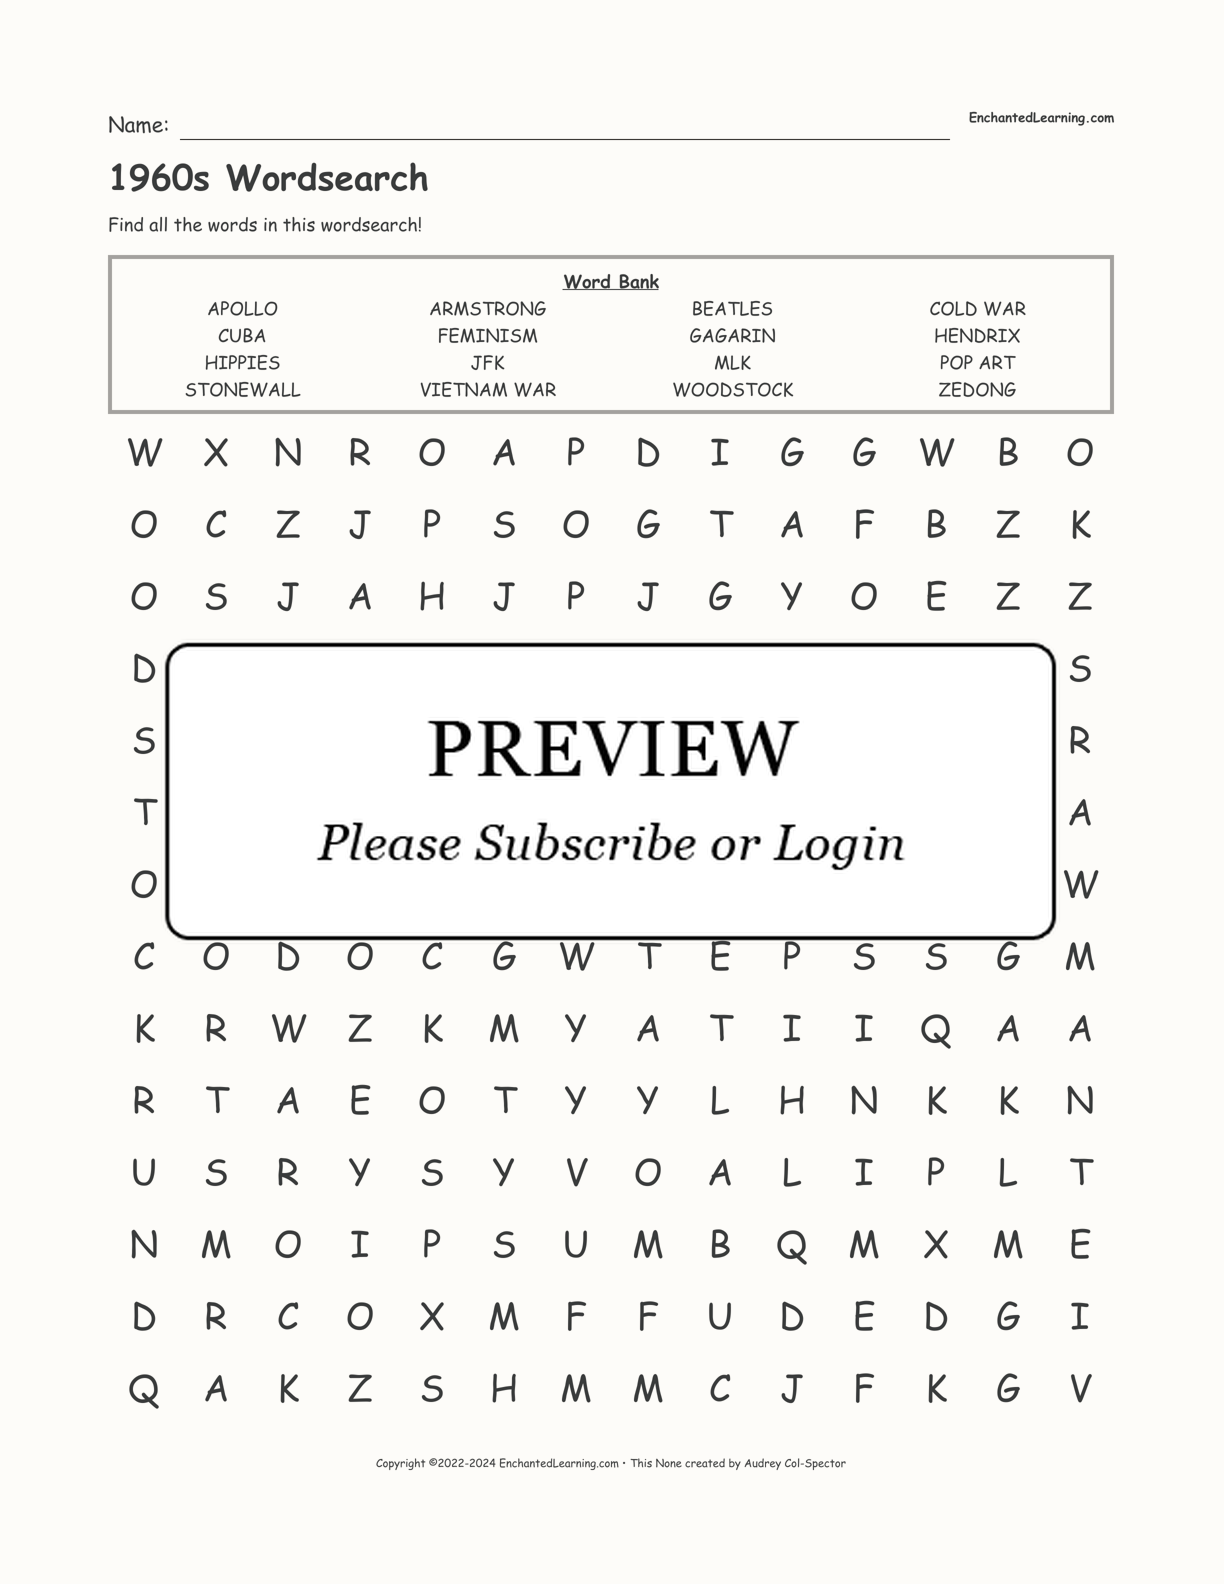 1960s Wordsearch interactive worksheet page 1